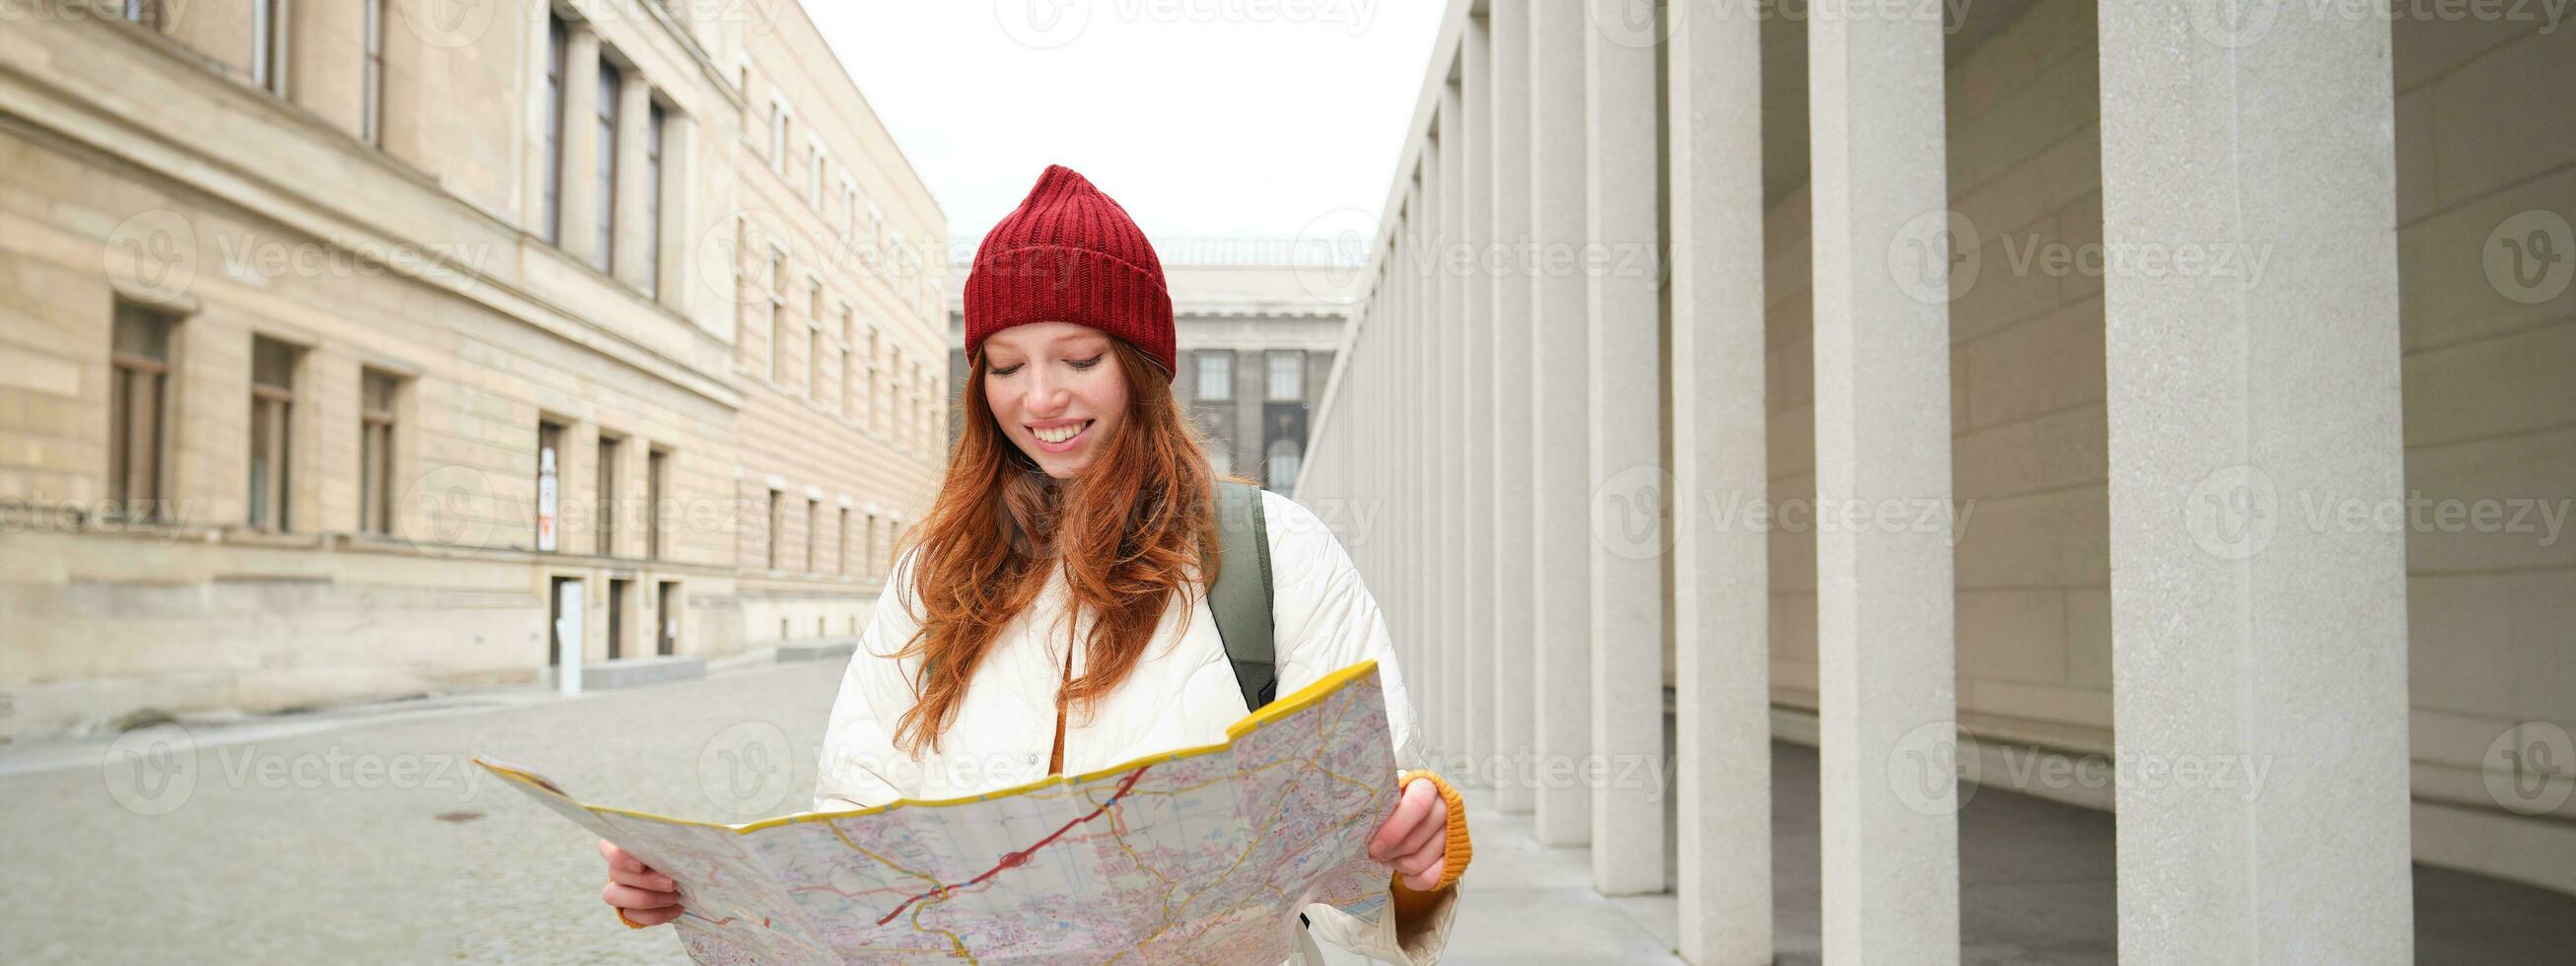 Redhead girl, tourist explores city, looks at paper map to find way for historical landmarks, woman on her trip around euope searches for sightseeing photo